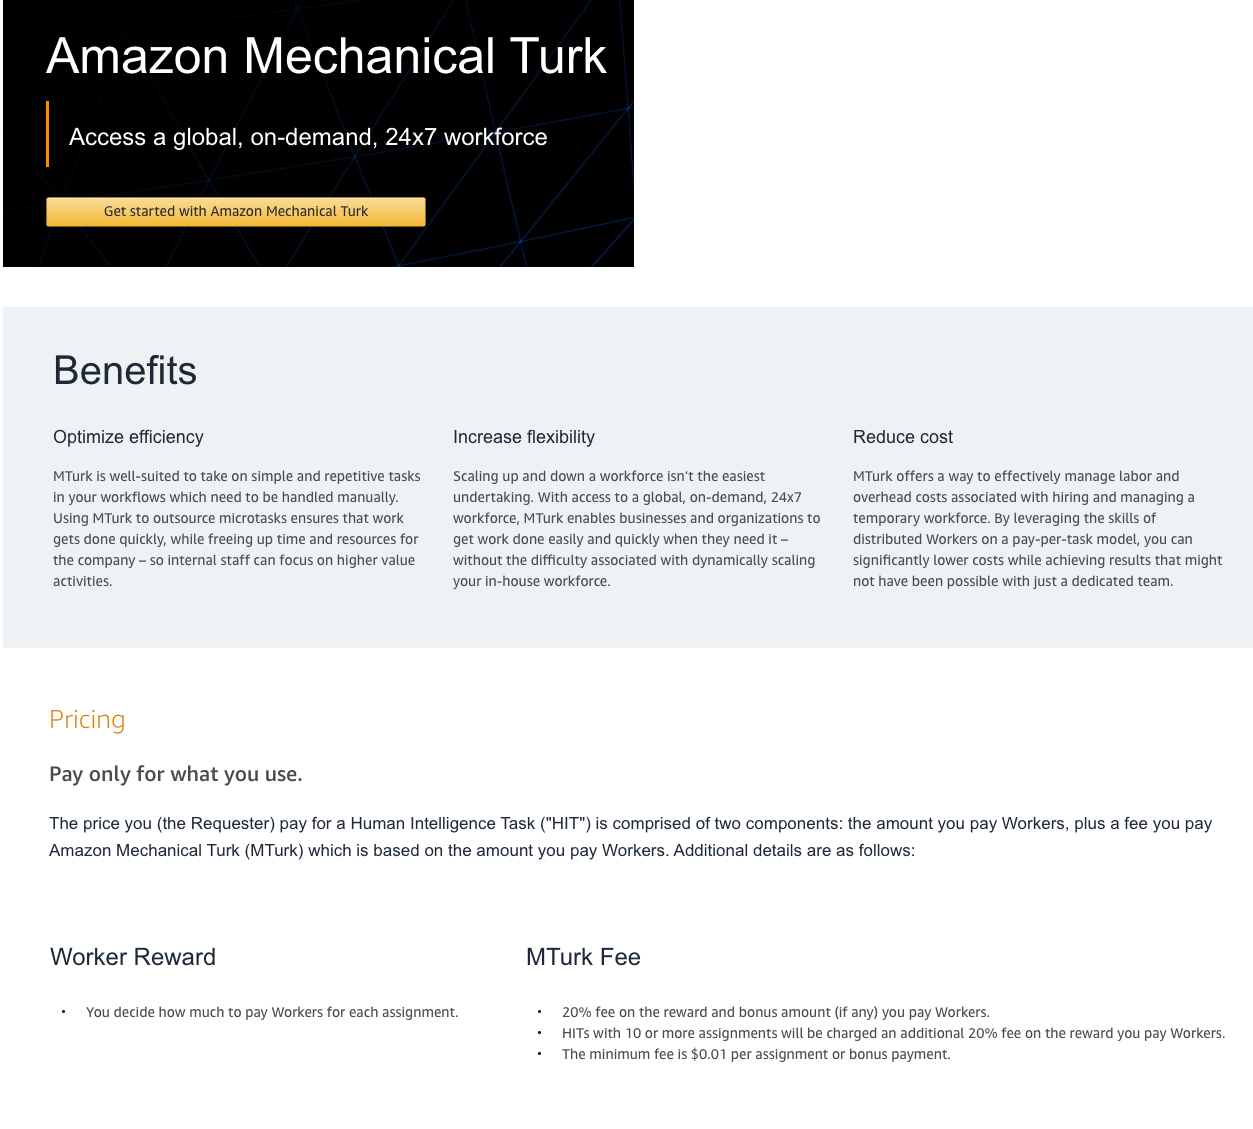 Screenshots from Mechanical Turk’s marketing homepage. Of note is the complete lack of visual representation of arguably one of the largest crowd-sourced workforces in the world.